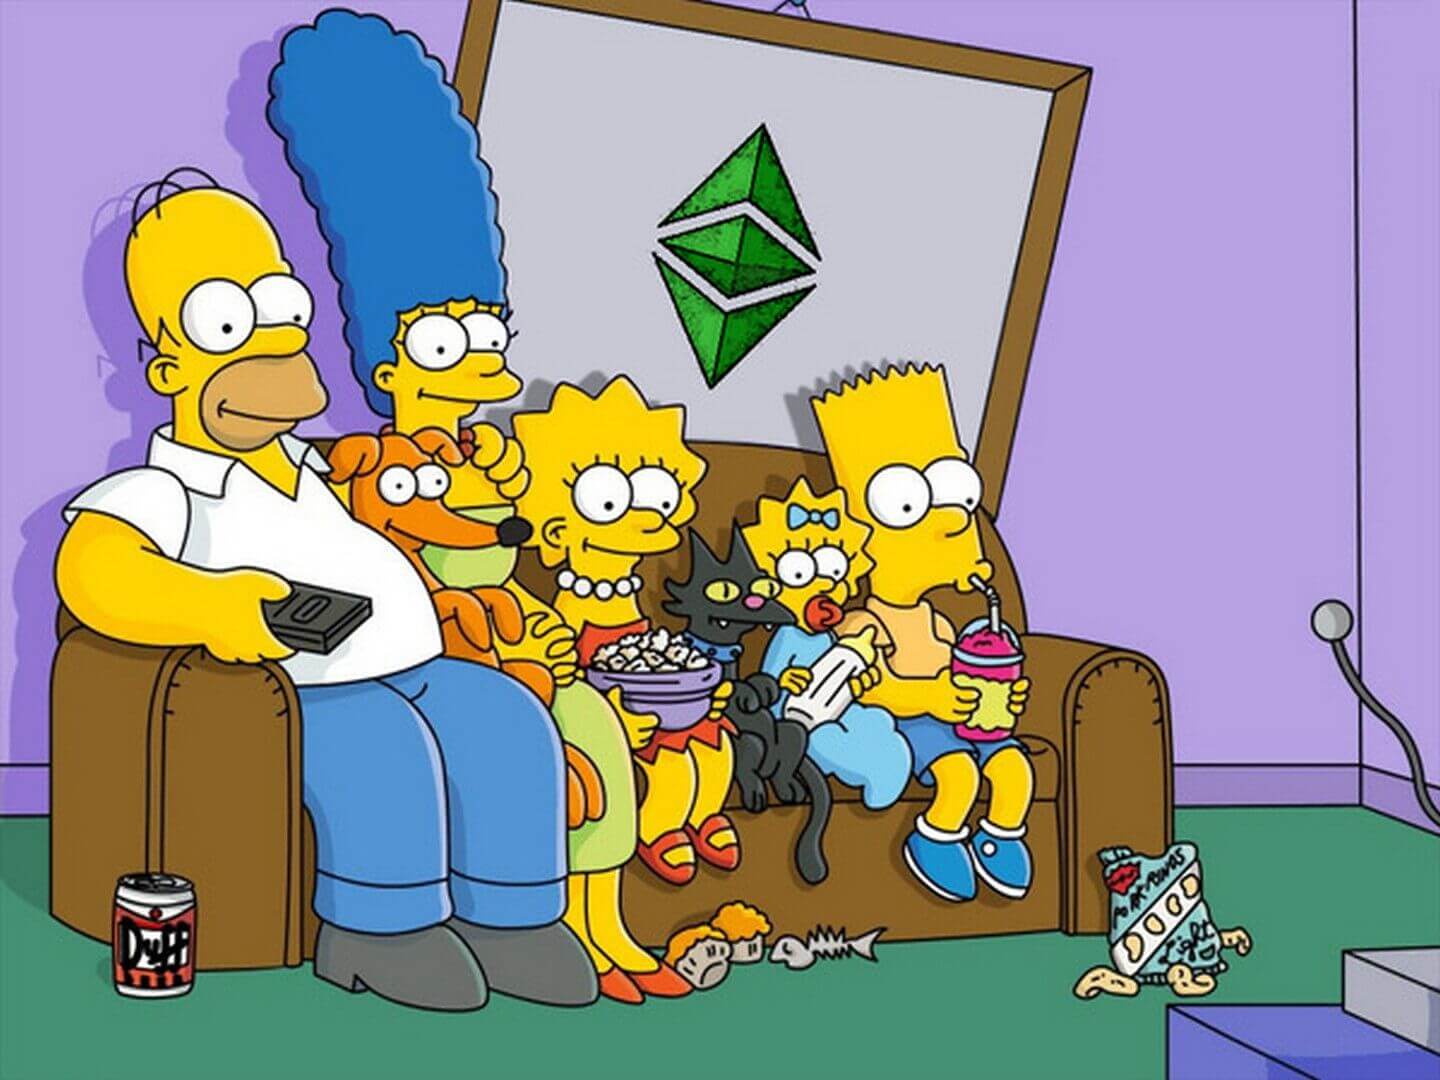 Does the Simpsons crypto episode predict the future?